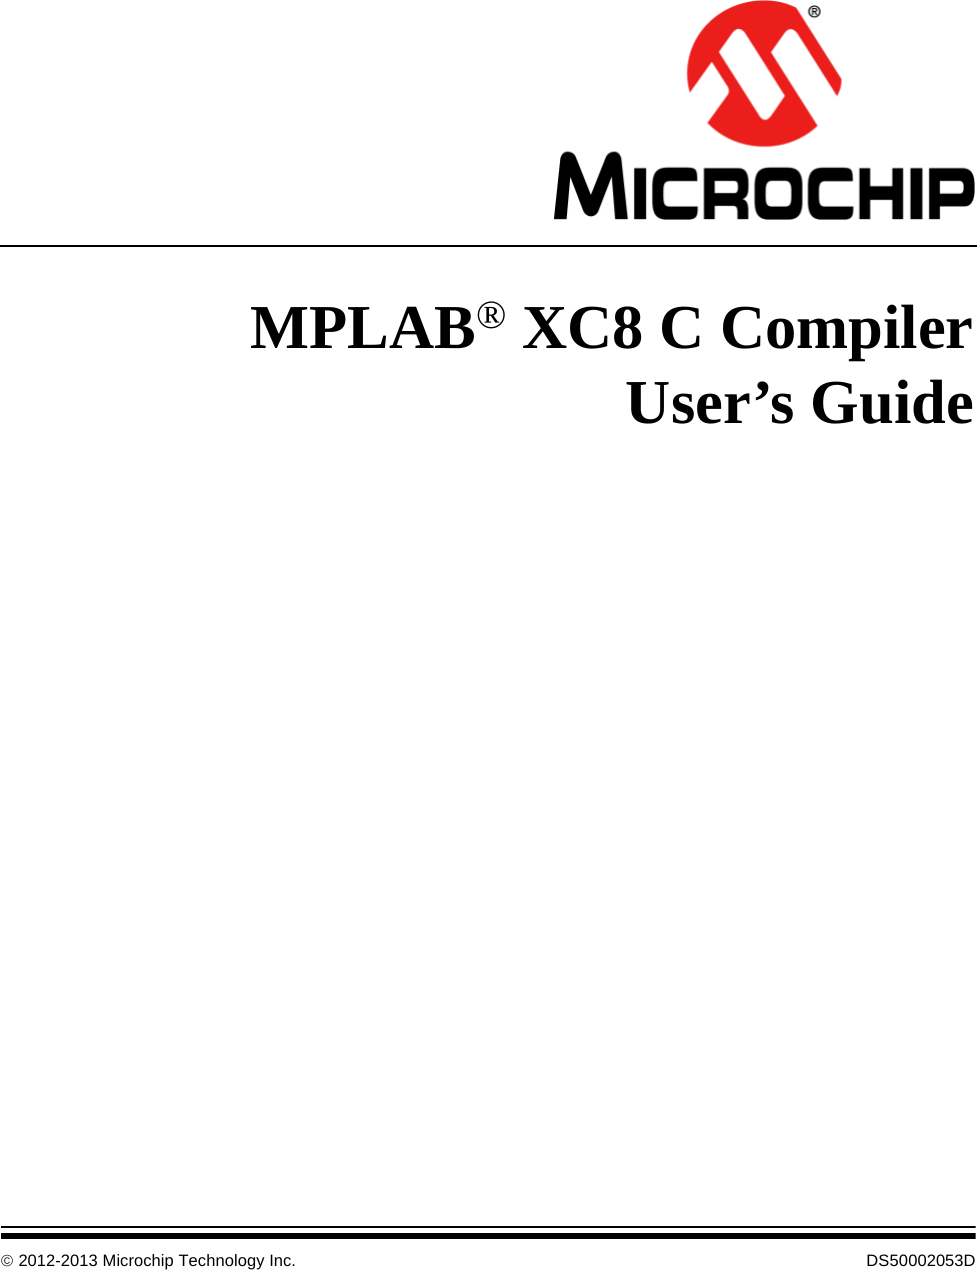 mplab xc8 pro compiler archeive